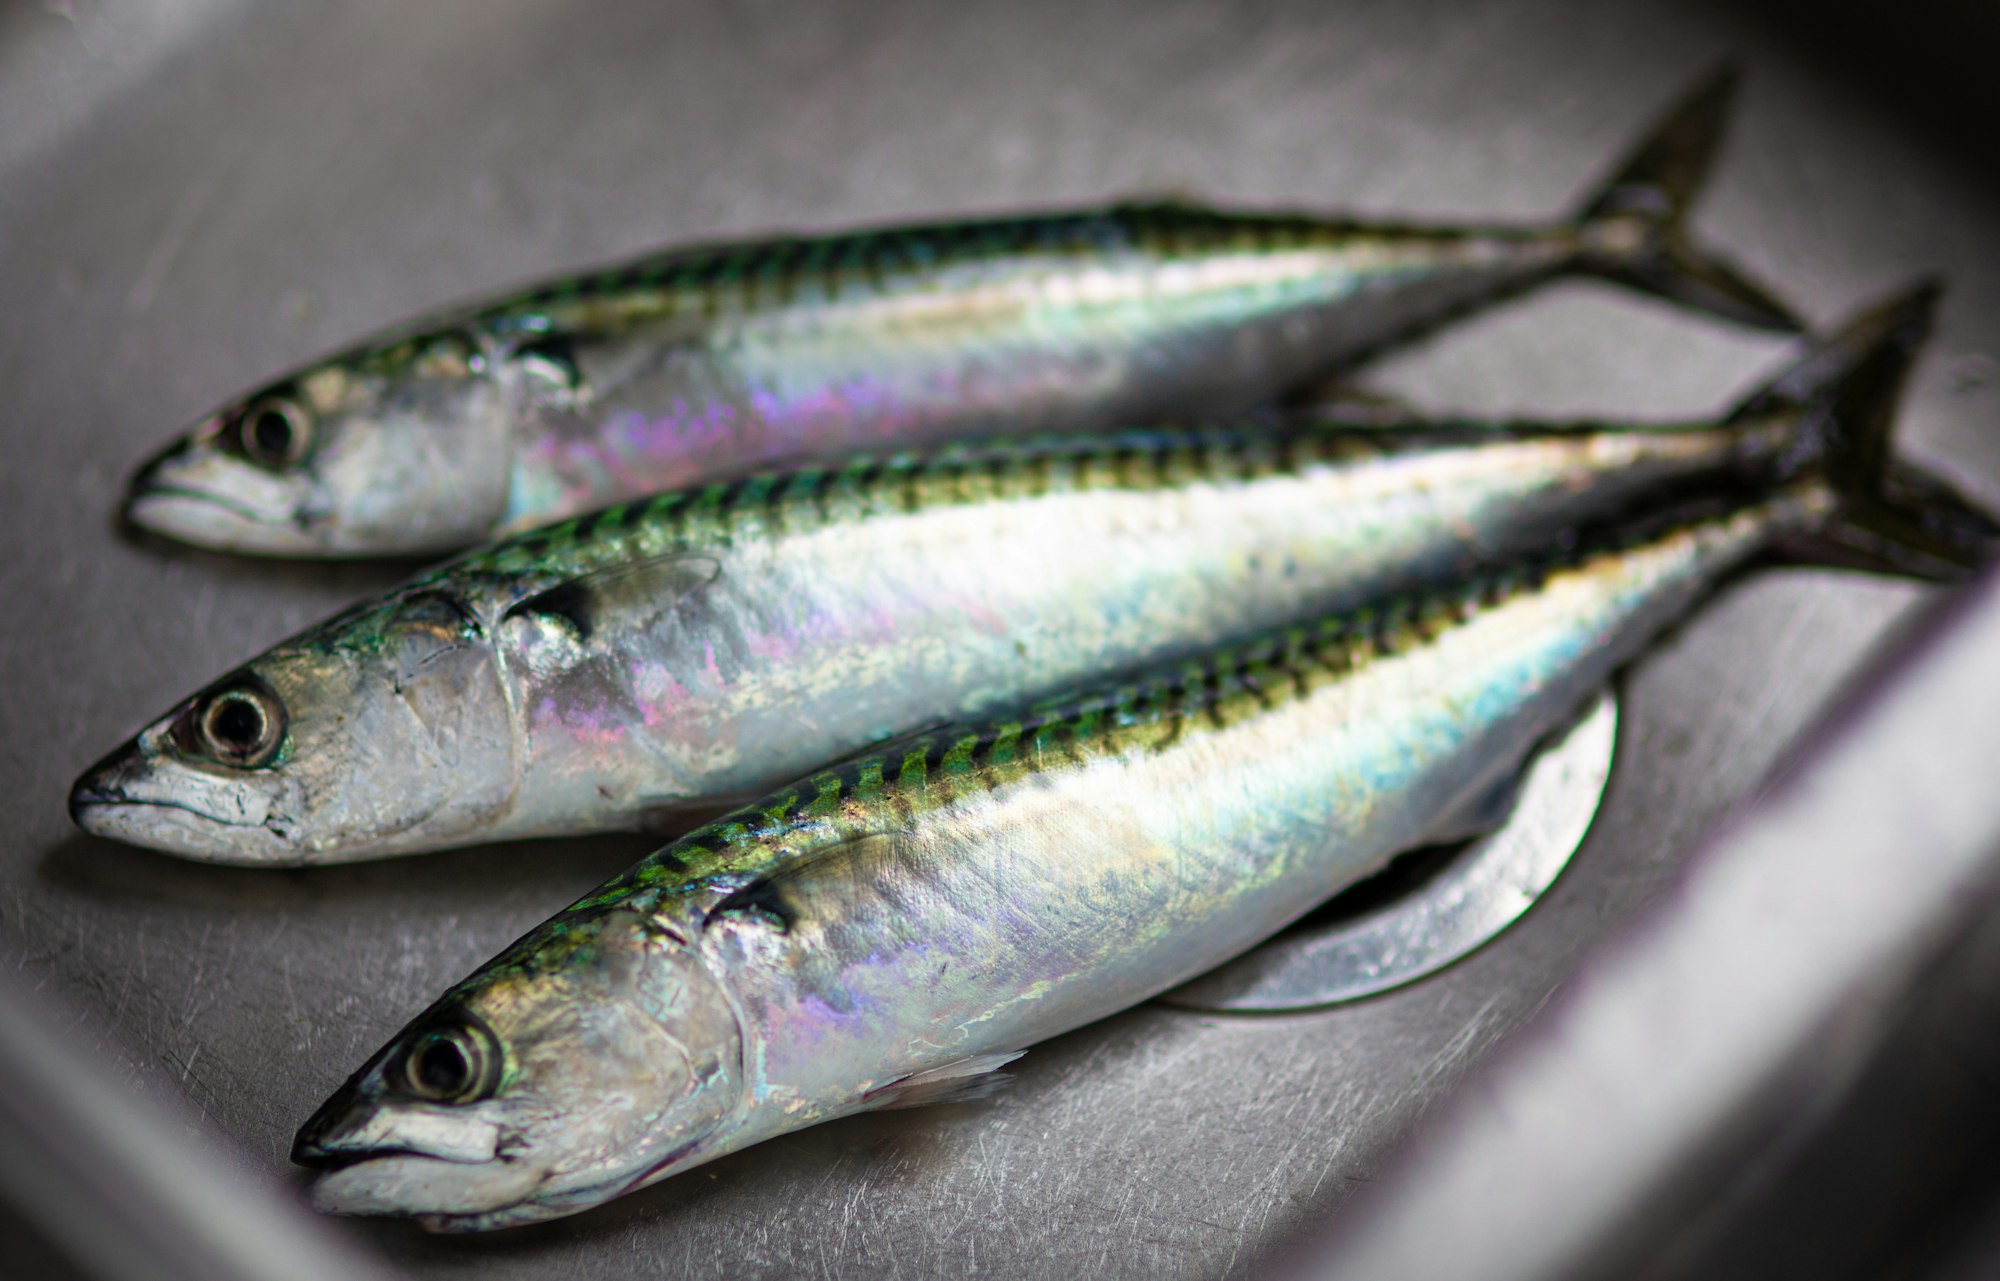 Mackerel freshly caught. 
Steel coloured fish in a stainless steel sink.